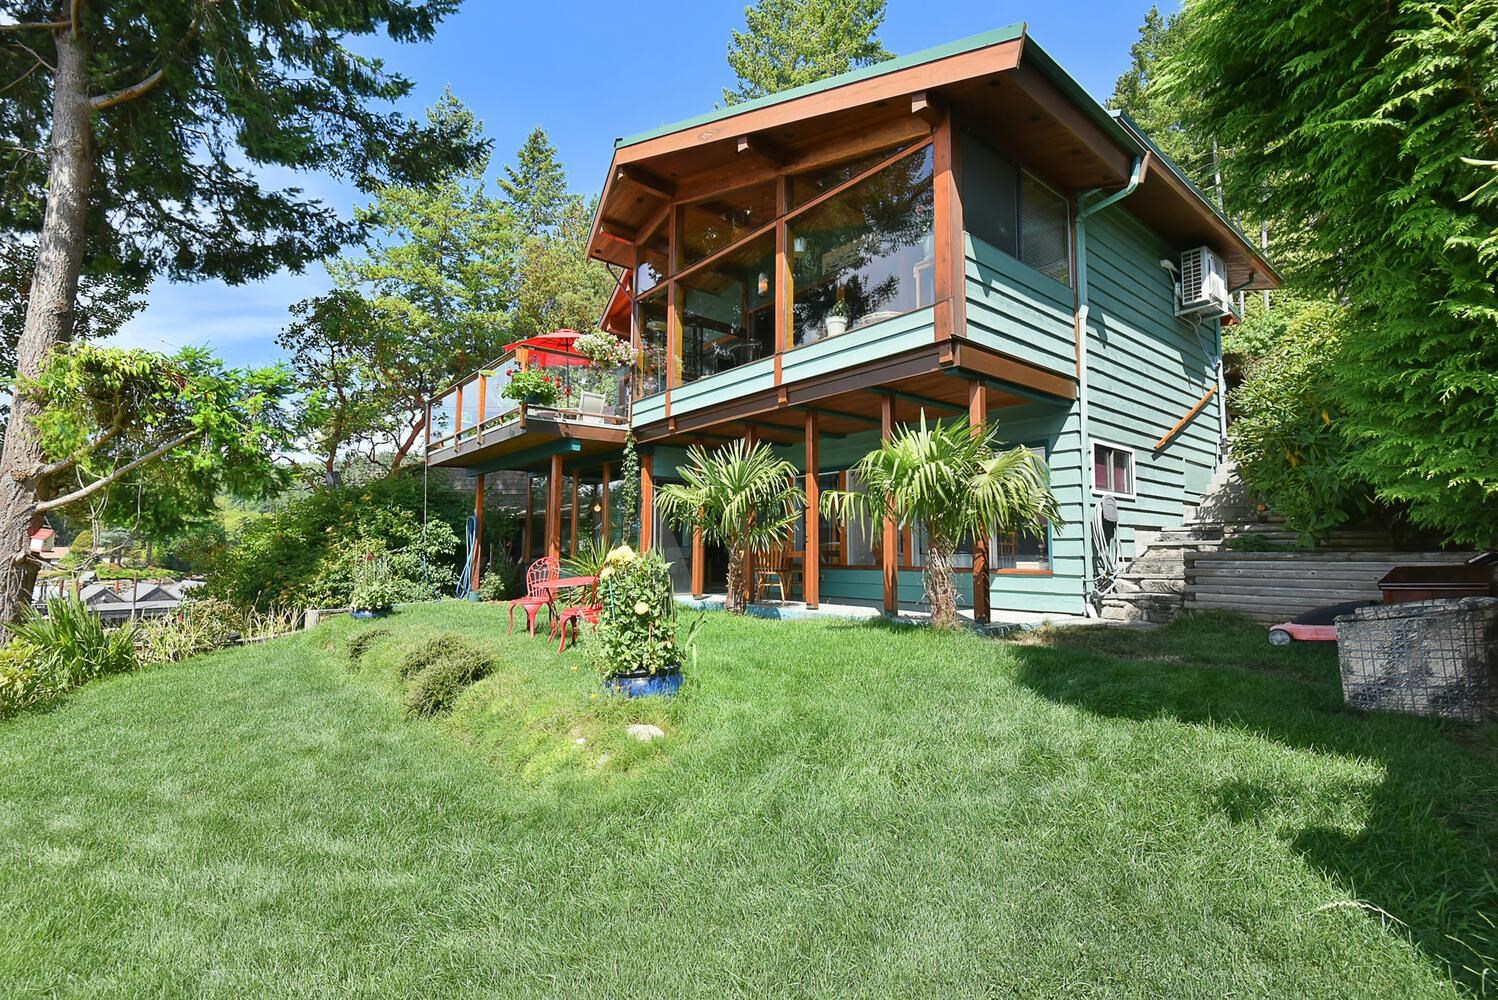 Pender Harbour Egmont House with Acreage for sale:  4 bedroom 2,387 sq.ft. (Listed 2106-02-06)